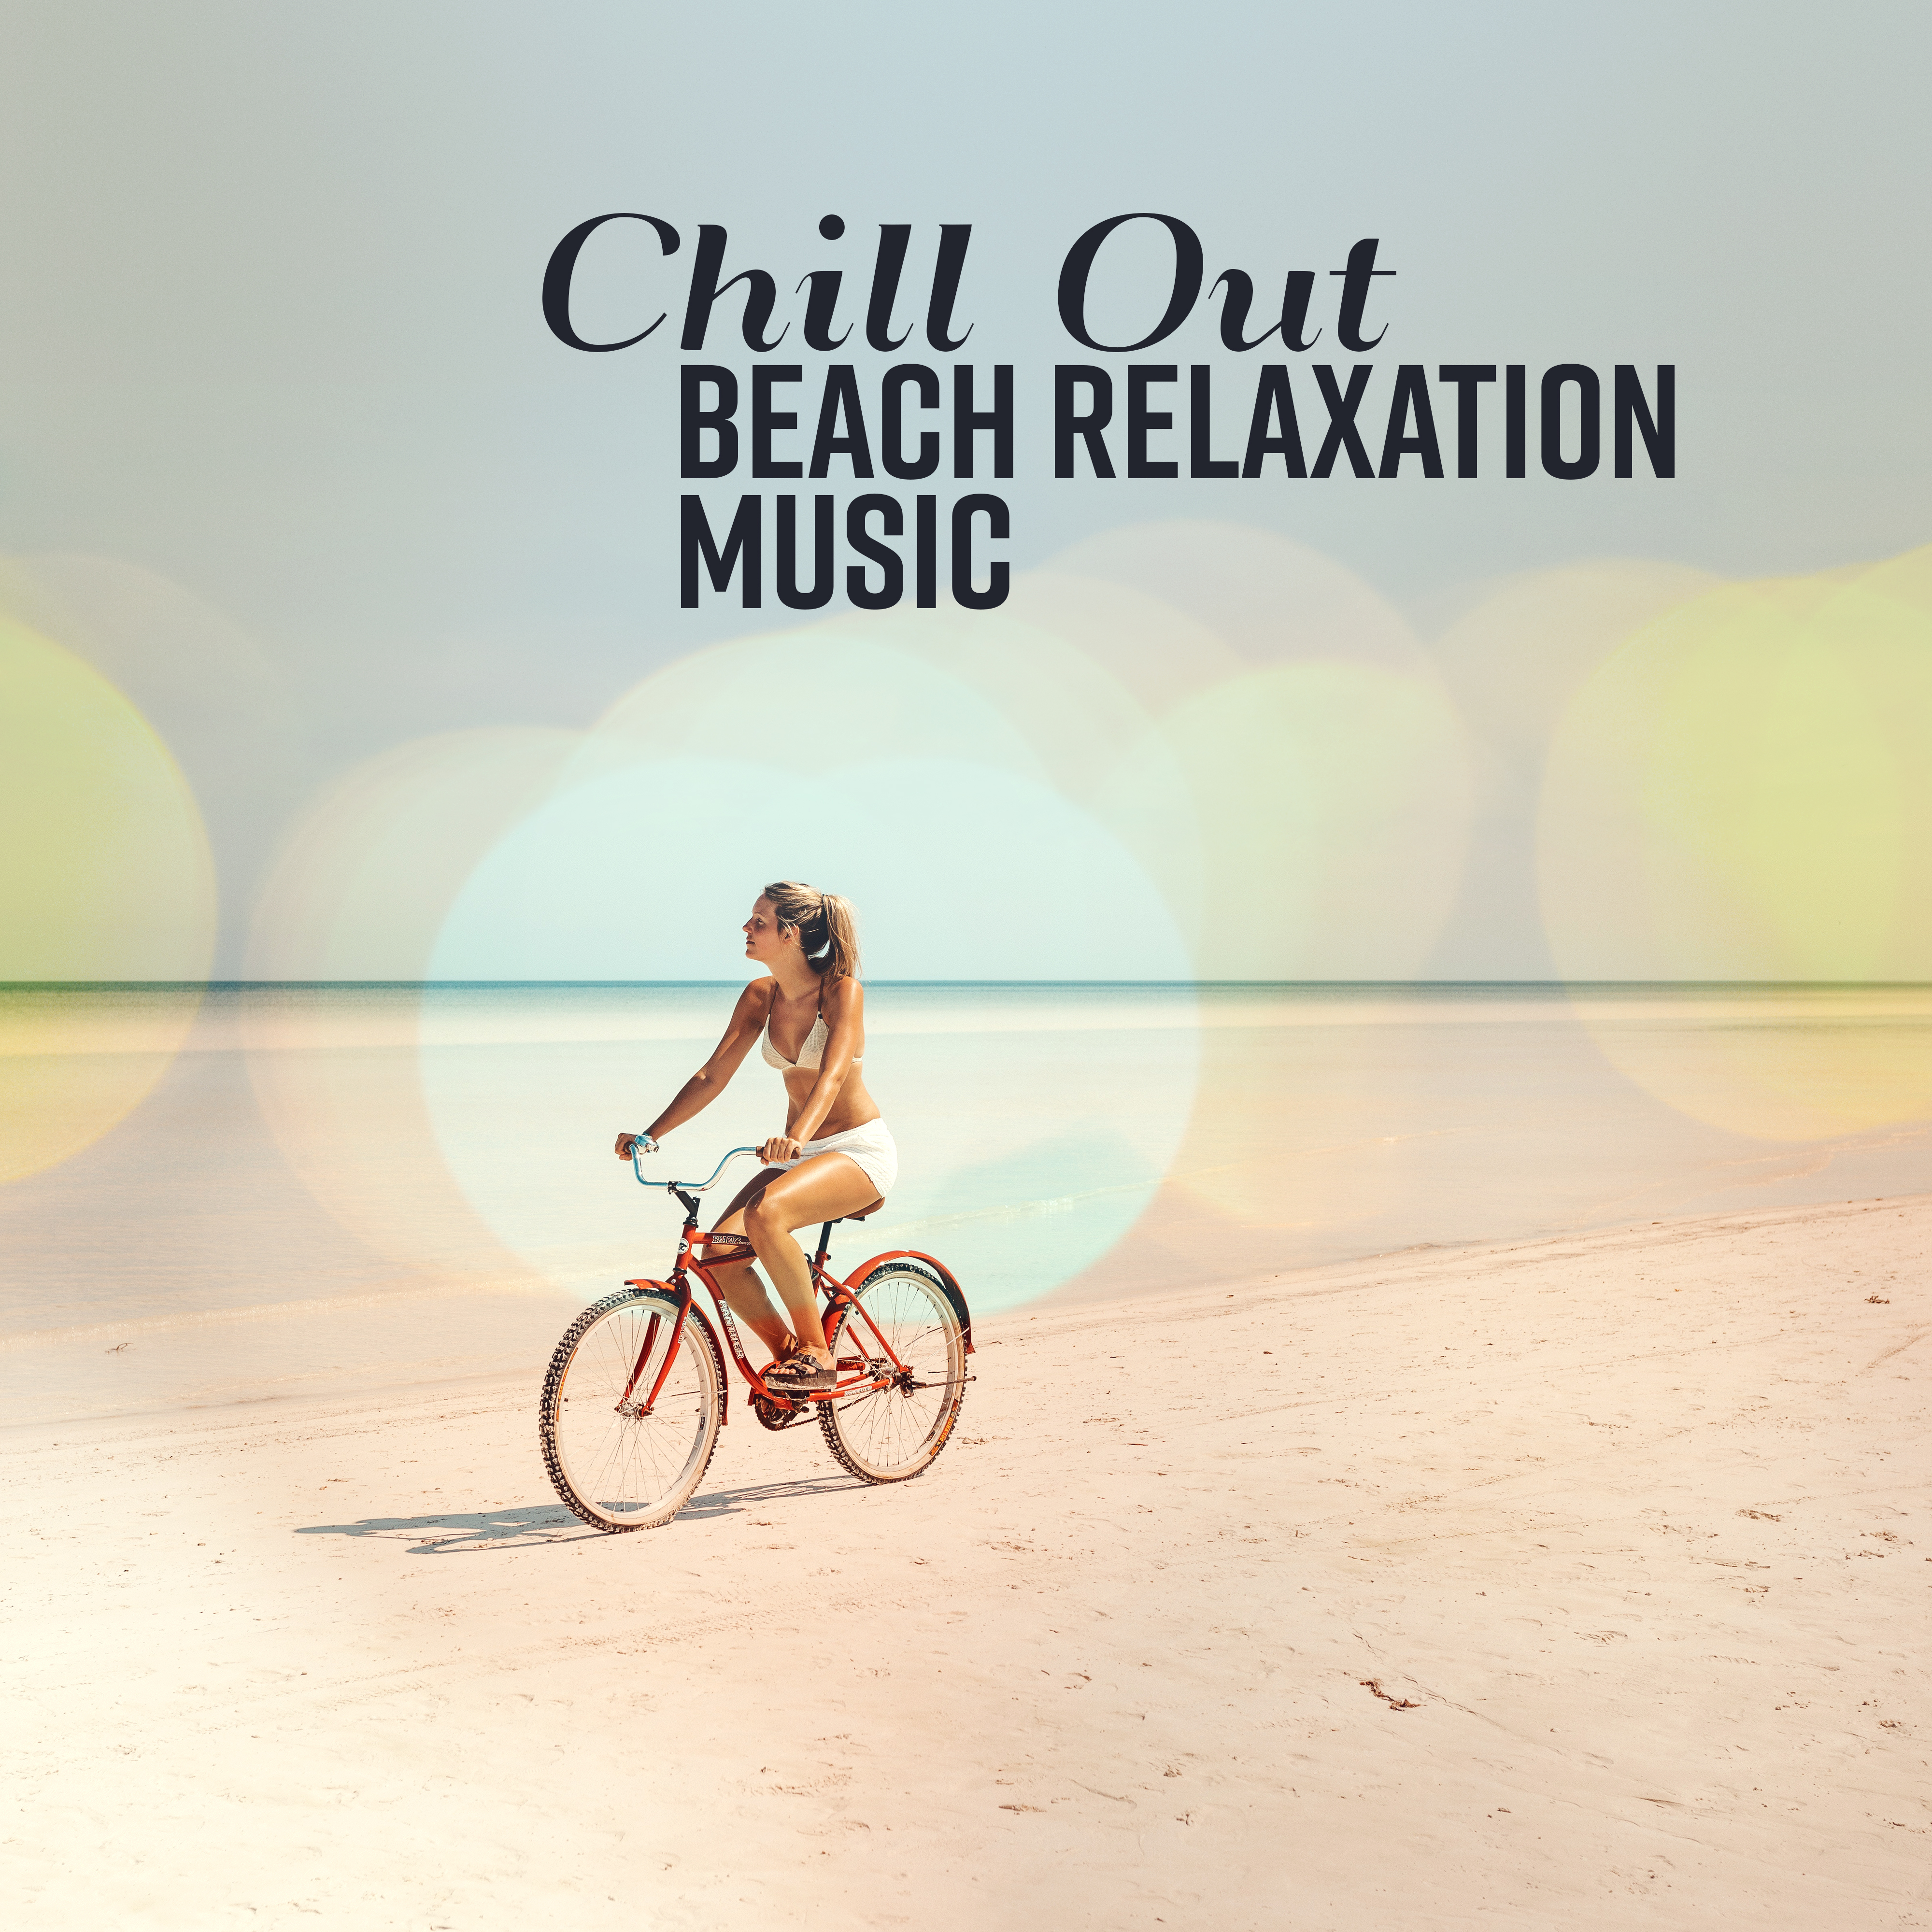 Chill Out Beach Relaxation Music